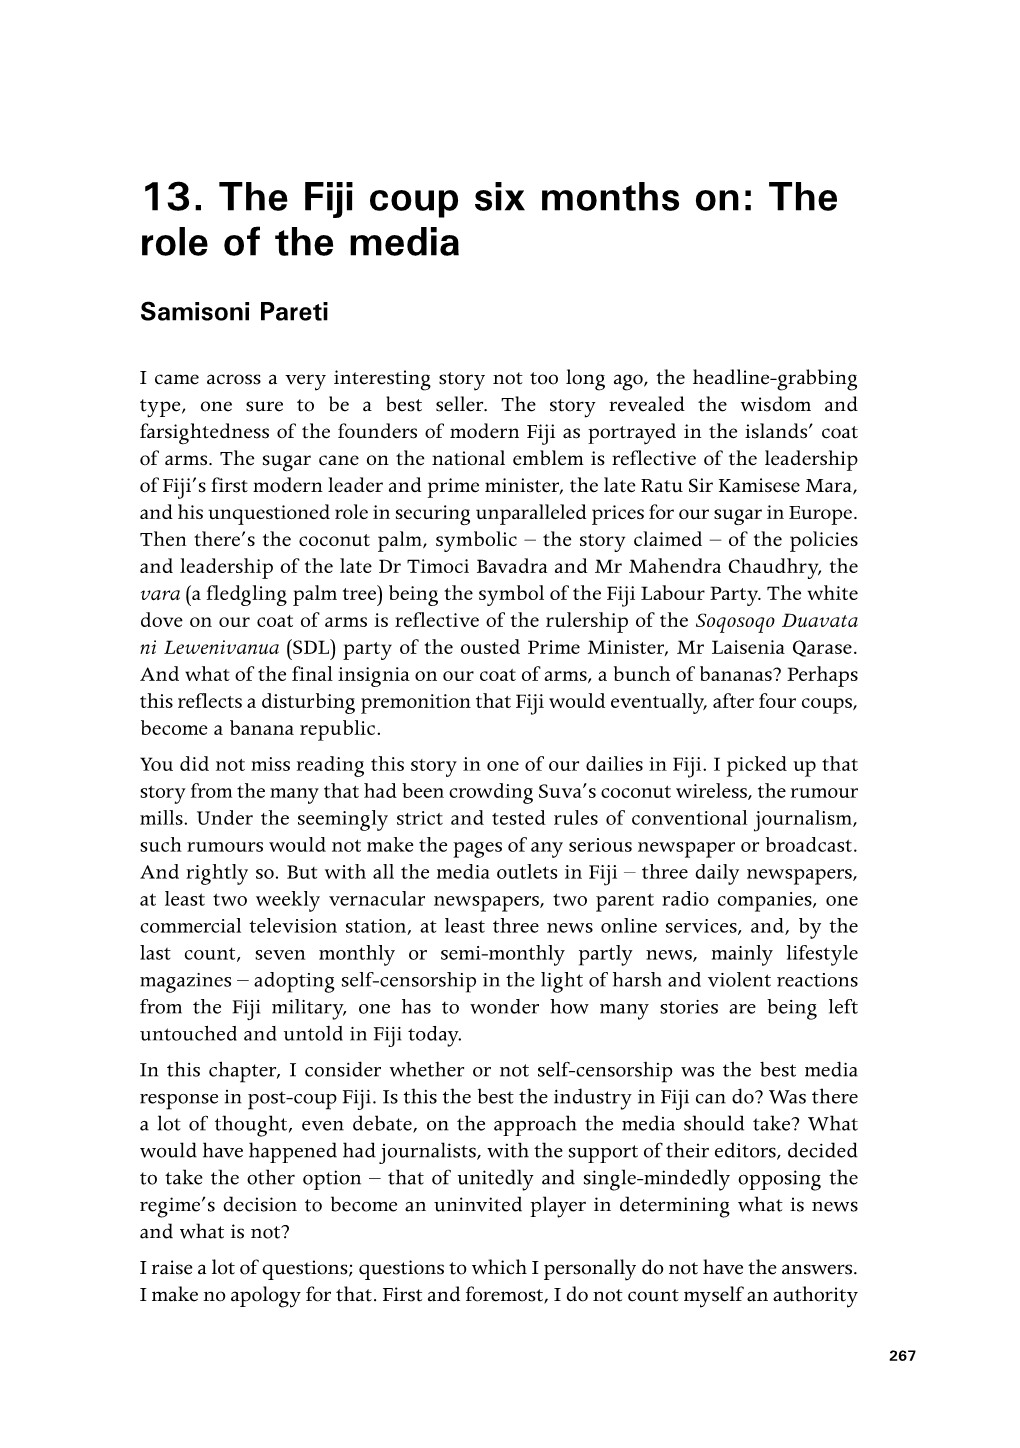 13. the Fiji Coup Six Months On: the Role of the Media